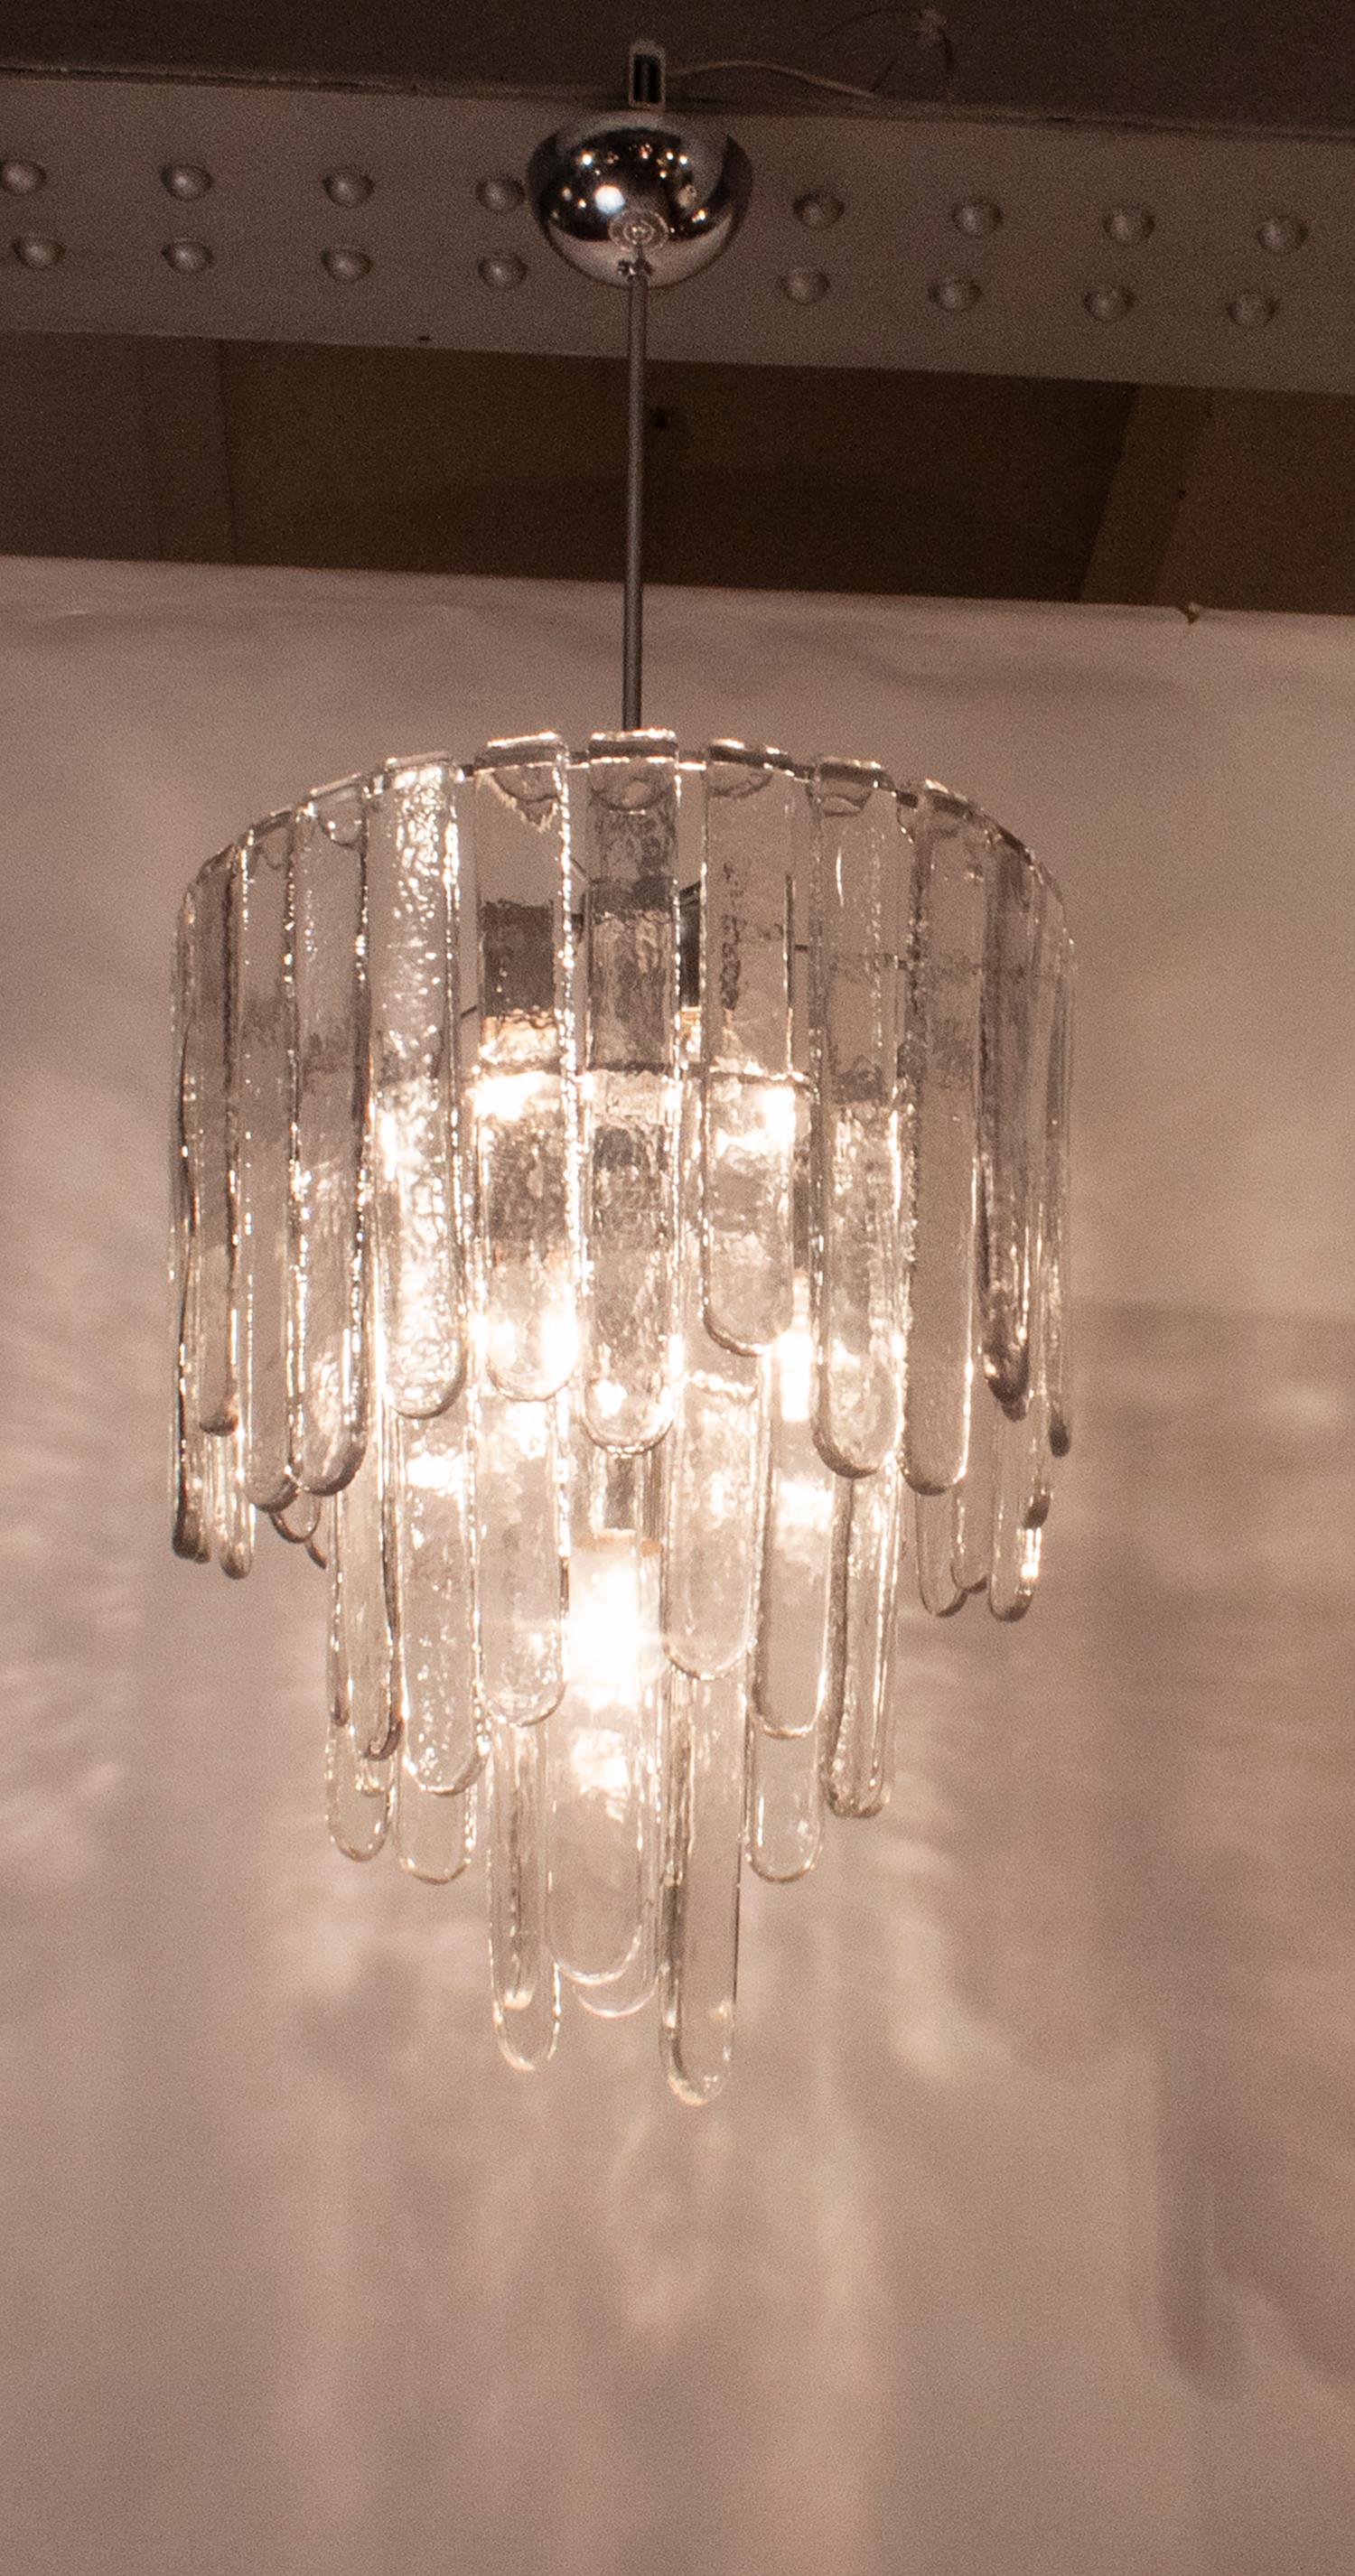 Cascade Chandelier Lamp by Carlo Nason for Mazzega, Italy, 1970's.
Transparent Murano glass.
It consists of six small screw bulbs. 
It is missing some glass, but it looks very good, you do not notice that it is missing any piece.